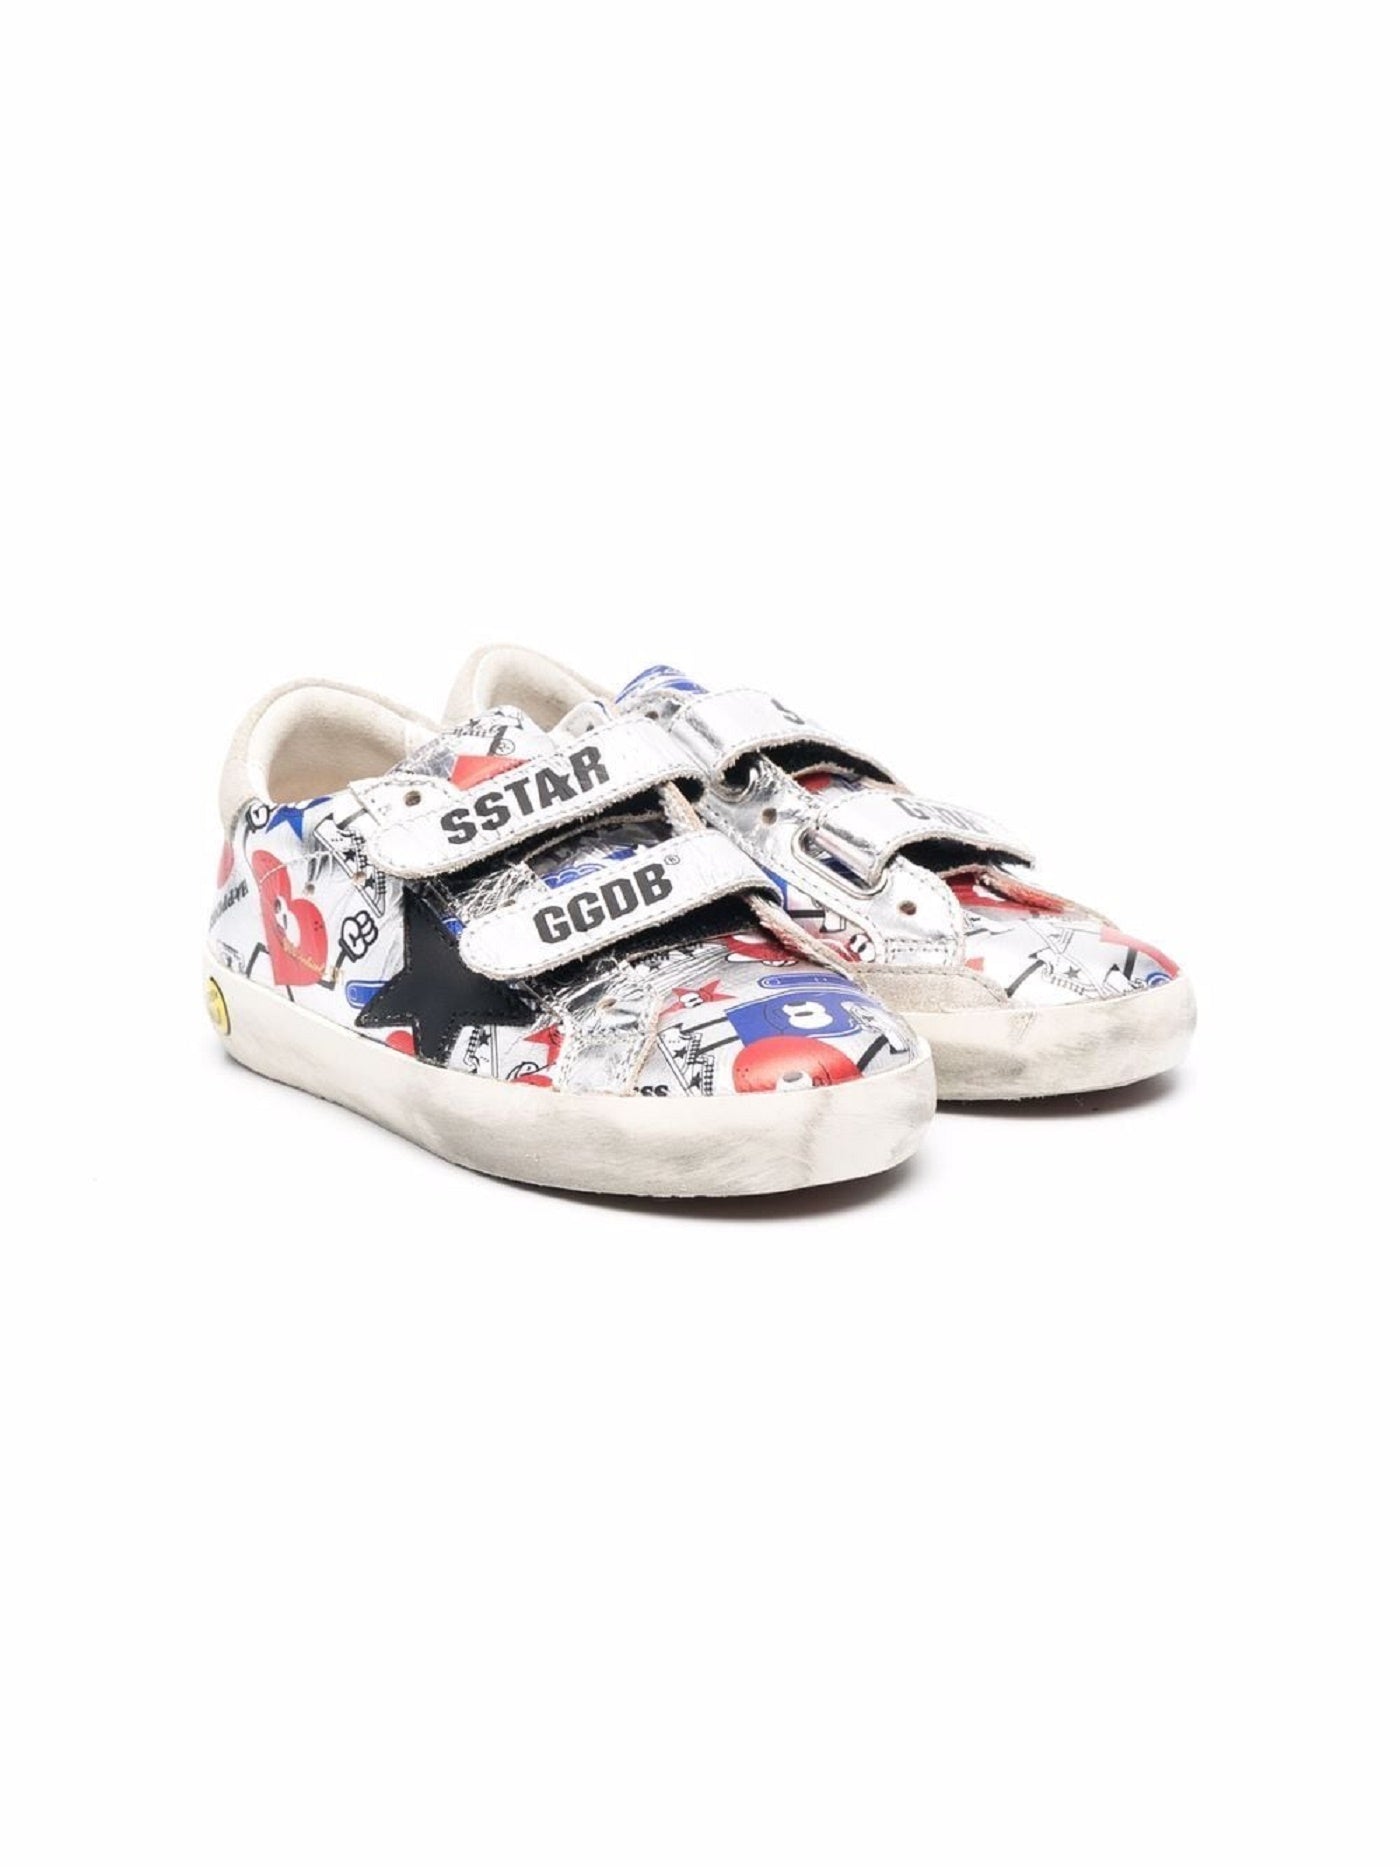 Sneakers Old School argento per bambini